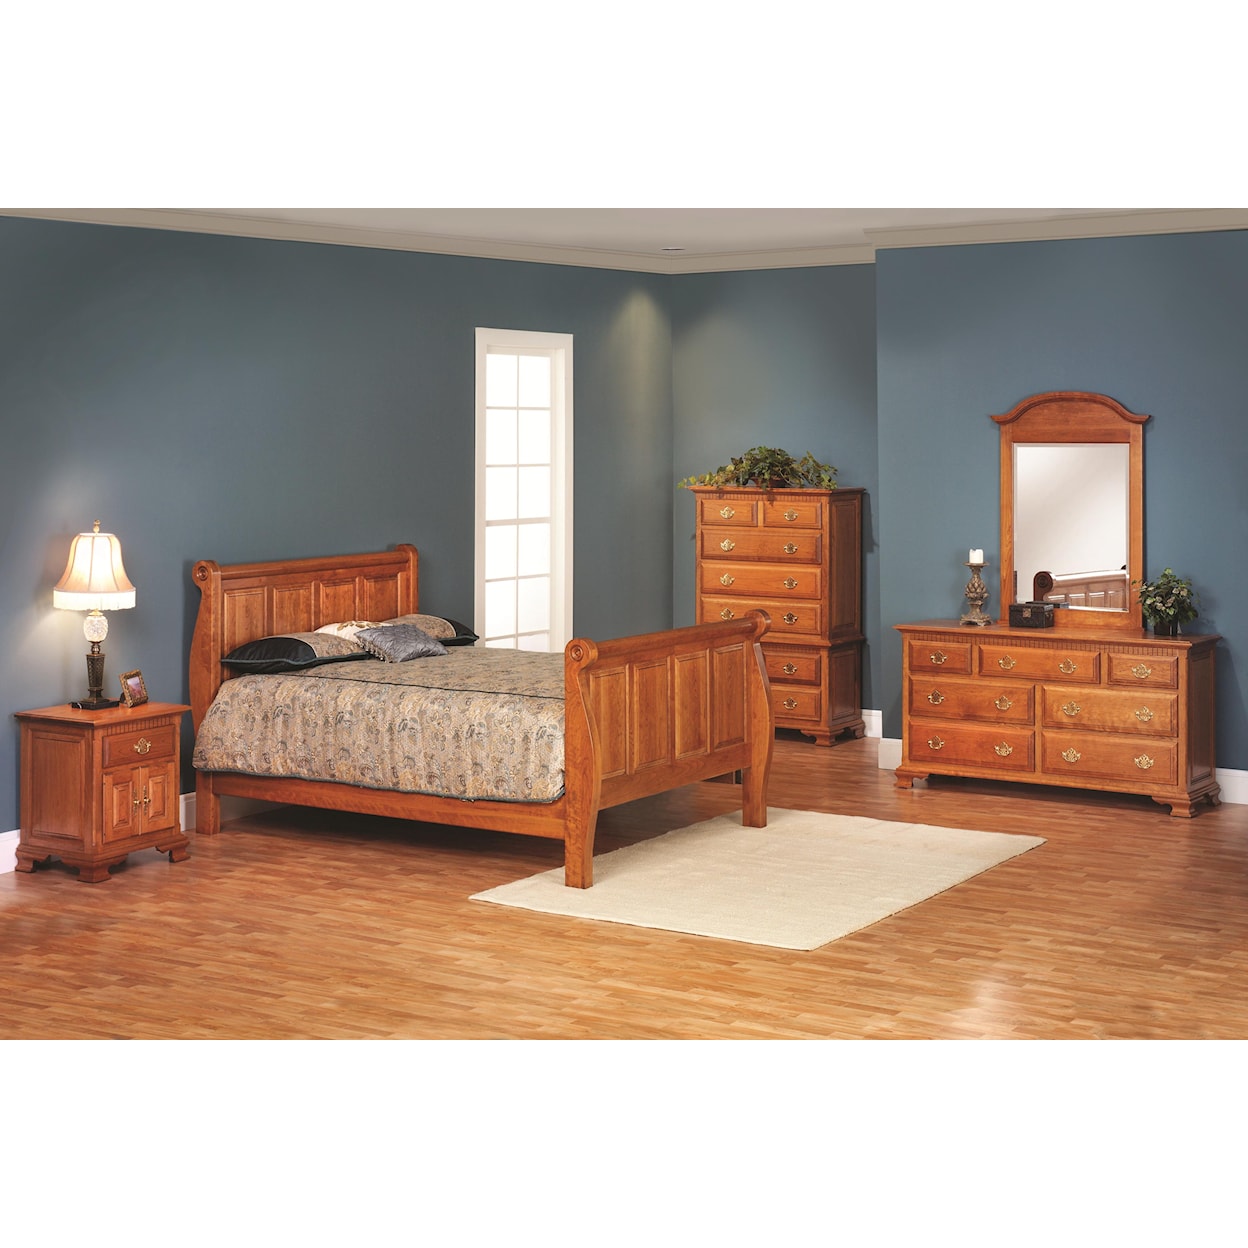 Millcraft Victorias Tradition Queen Sleigh Bedroom Group